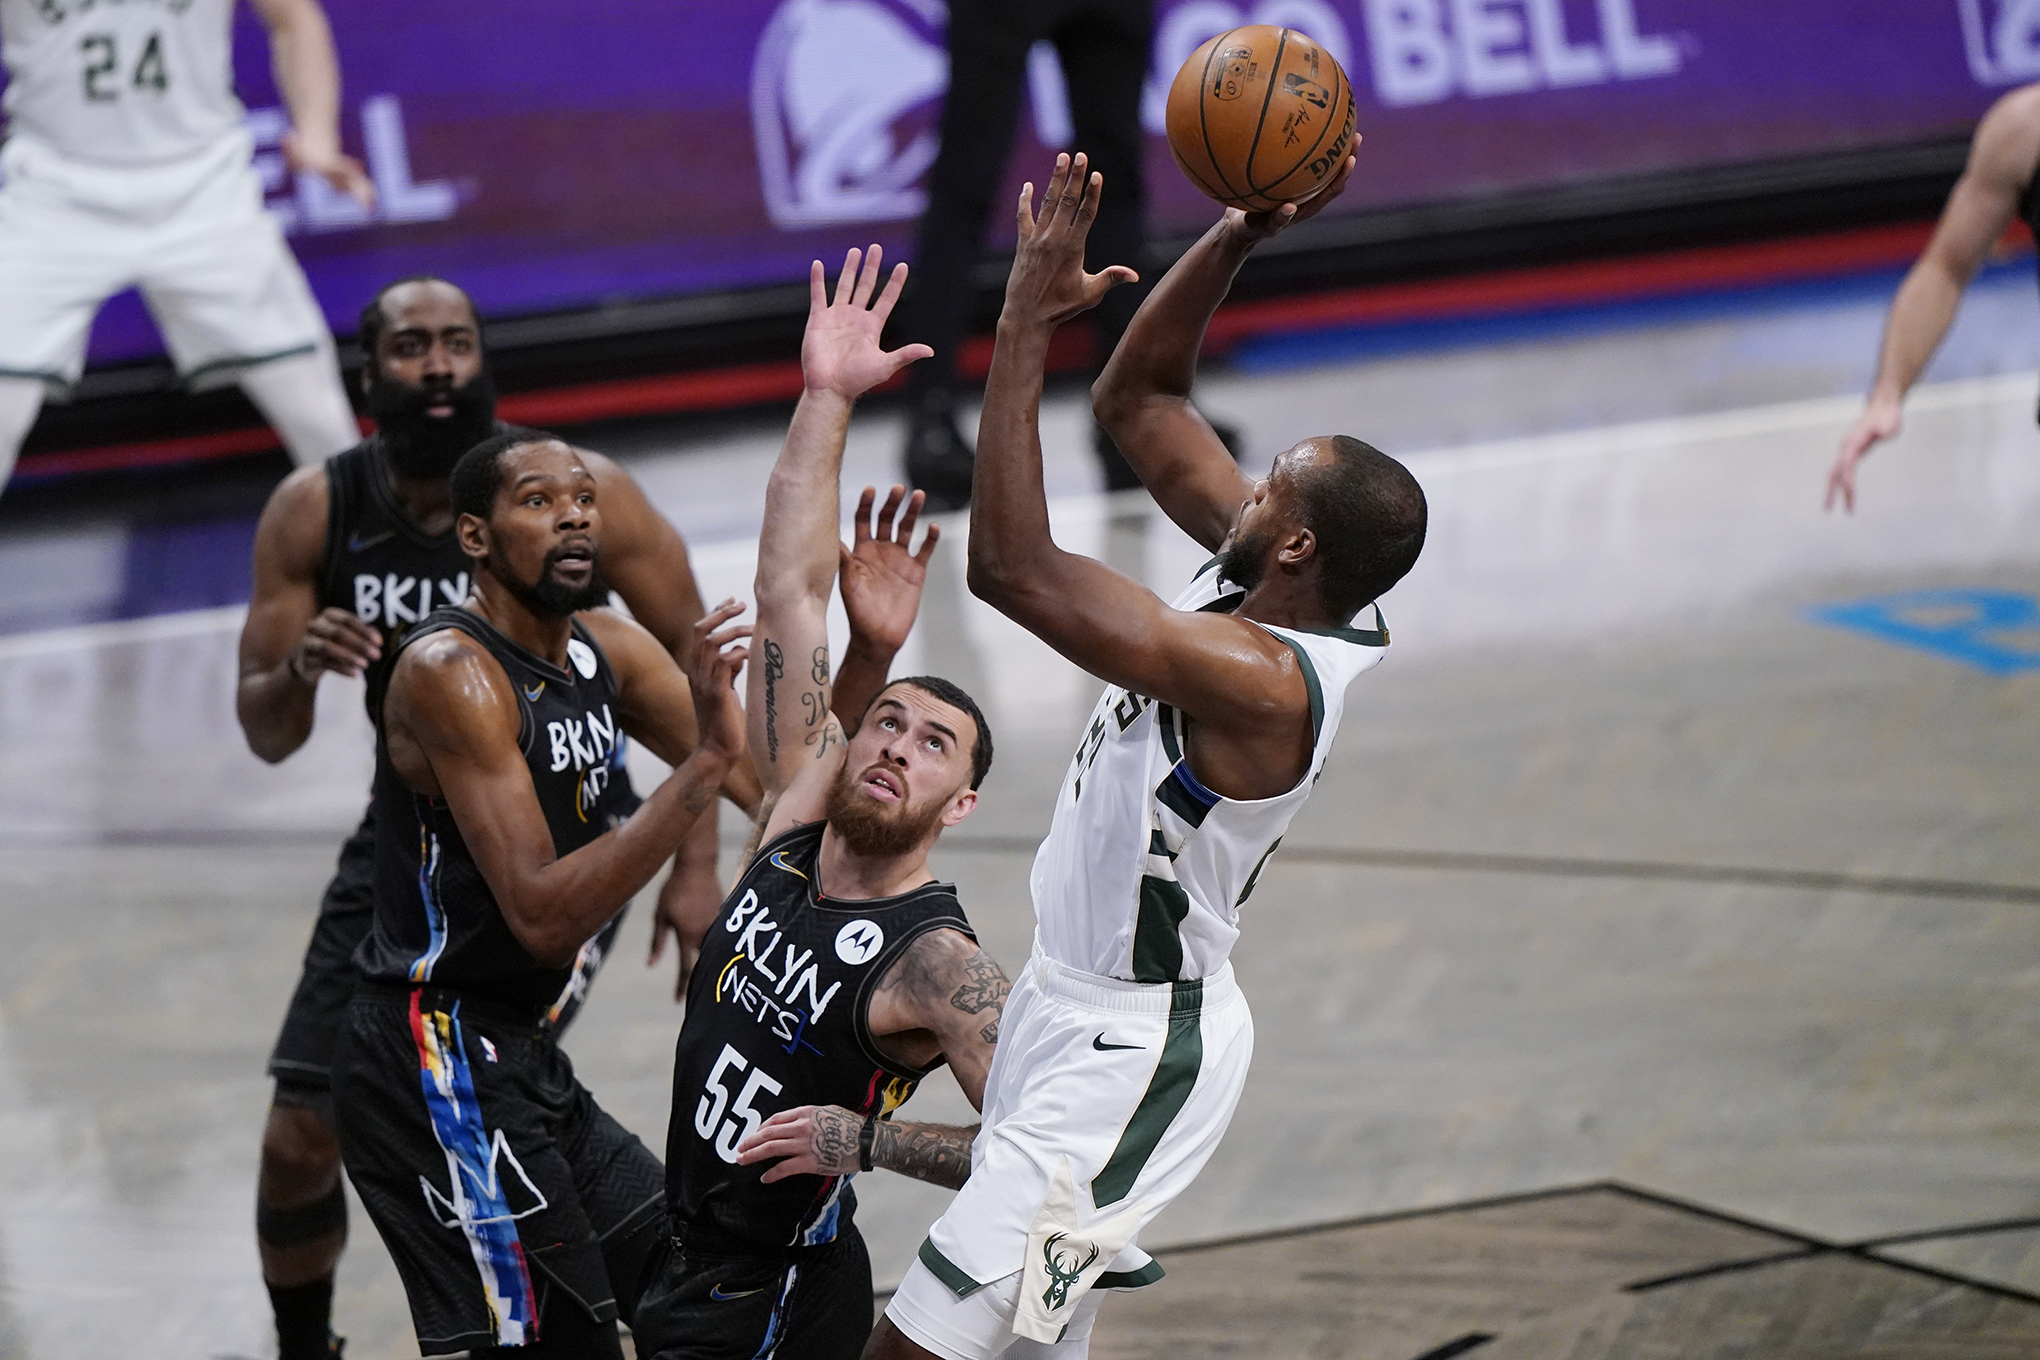 Nets Mike James defends Bucks forward Khris Middleton as he goes up for a layup